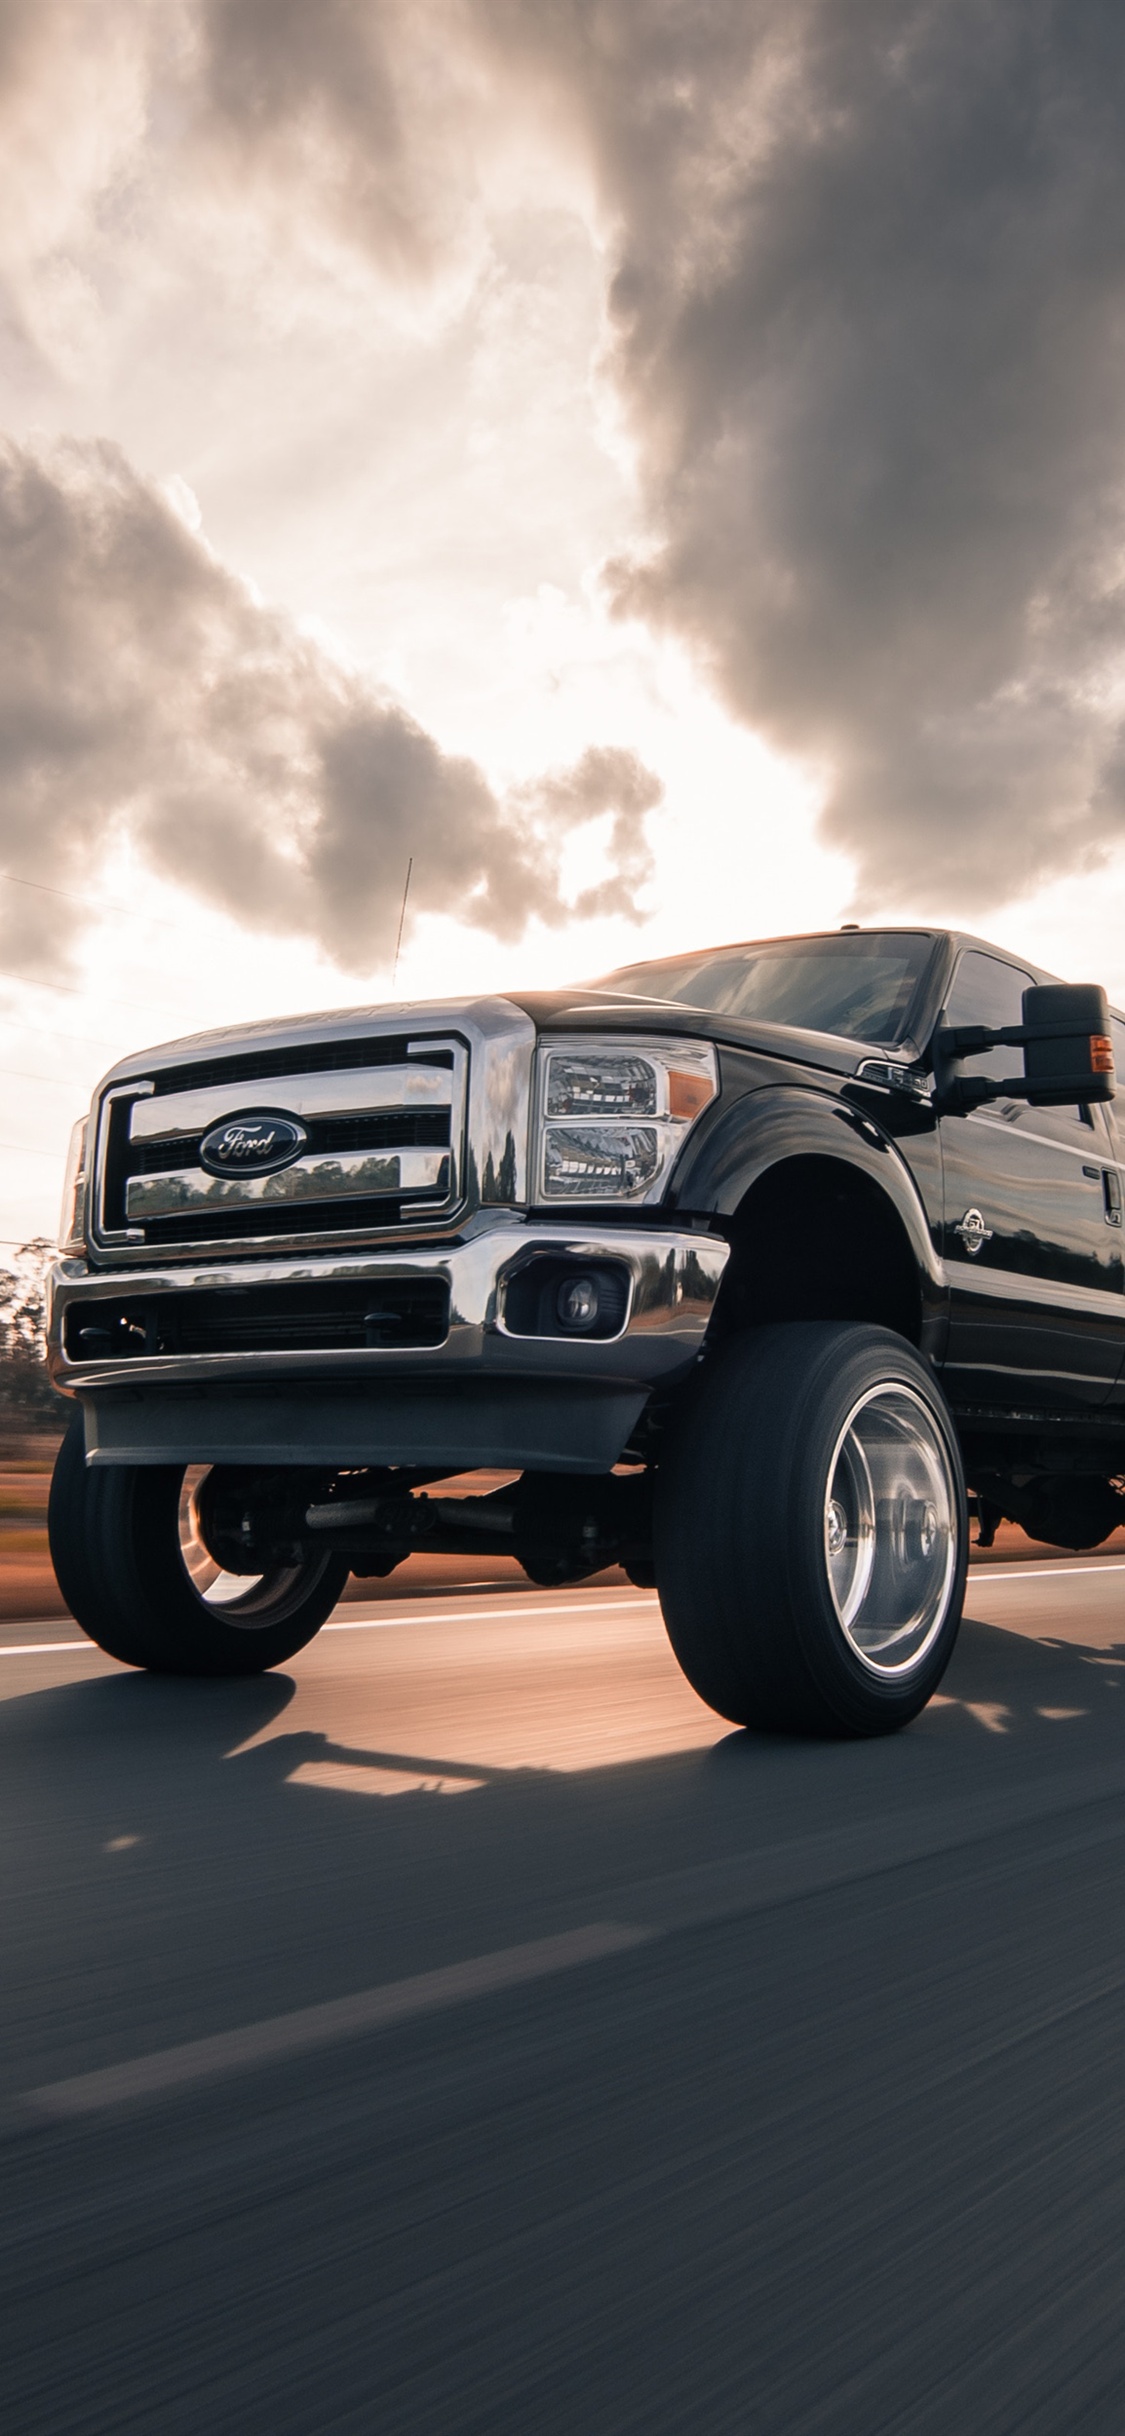 Ford Truck Wallpaper iPhone